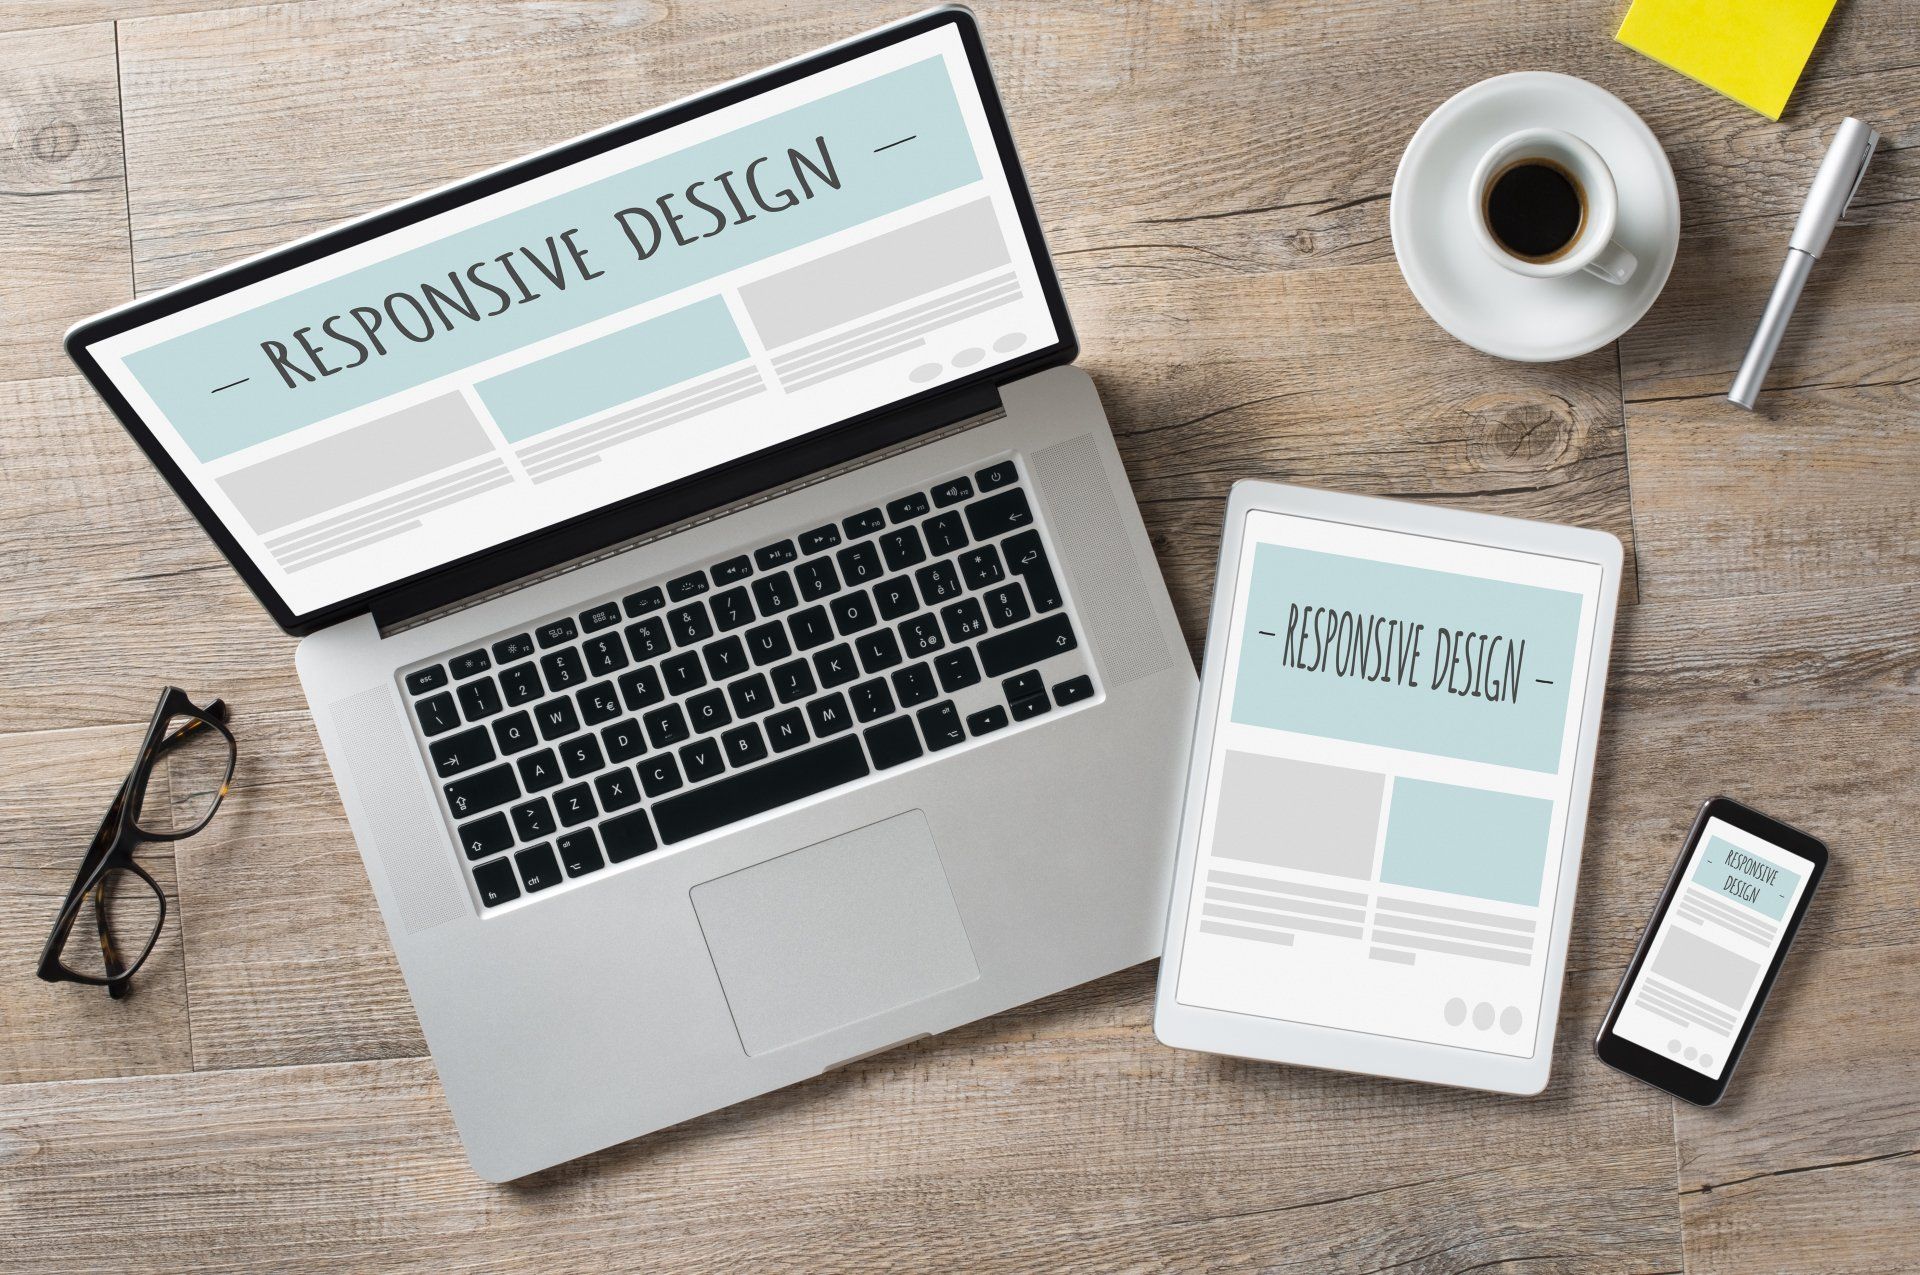 Why you need a responsive website design